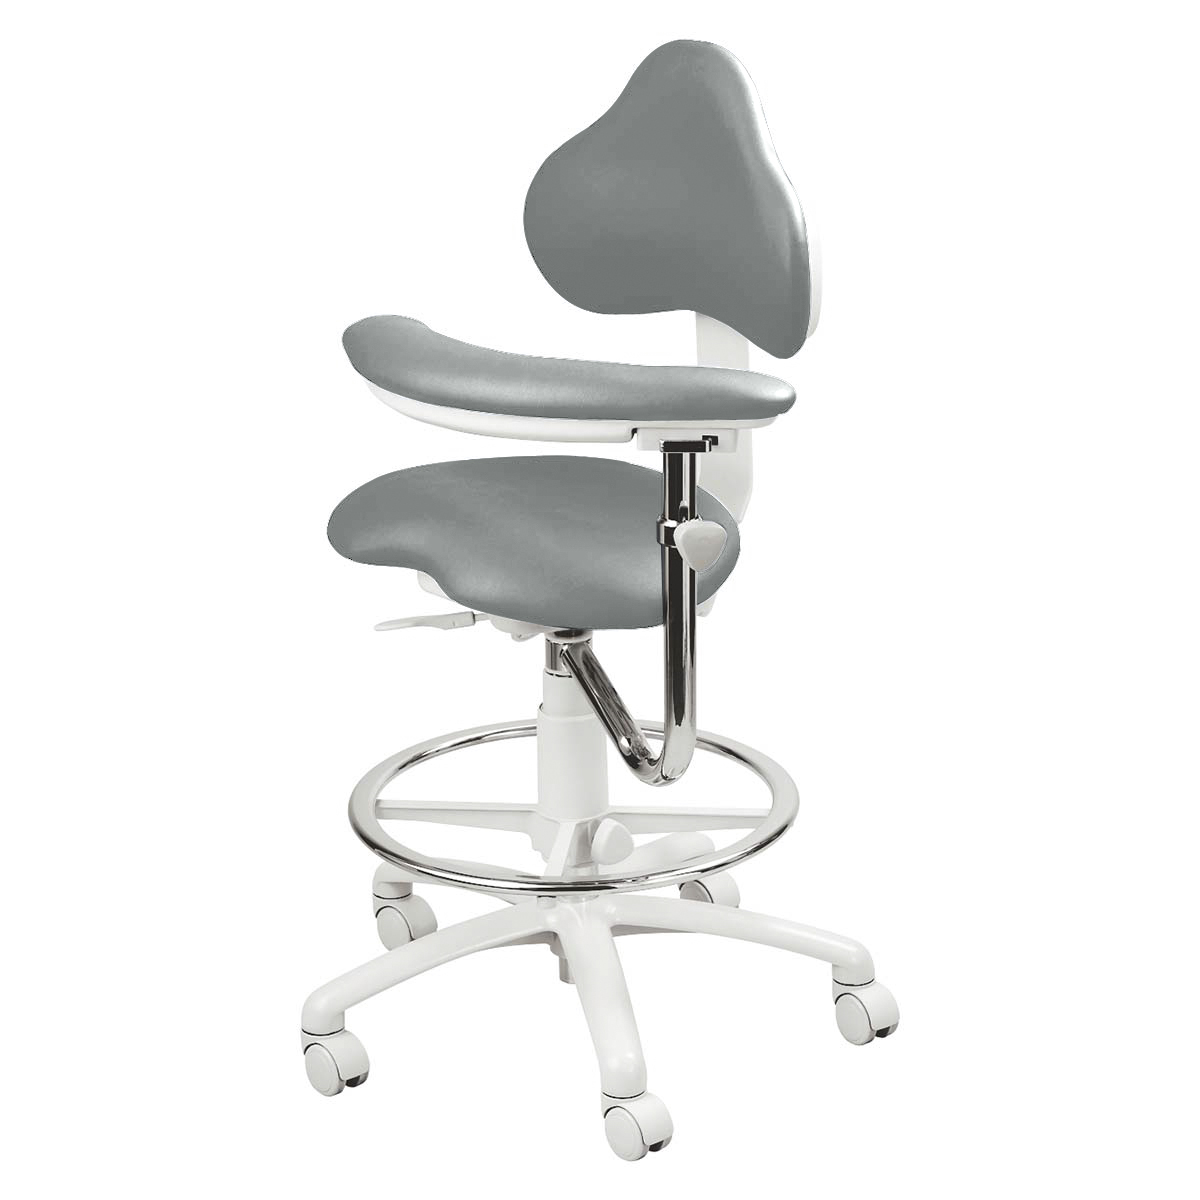 9120BL Dental Assistant Stool with Left Support, UltraLeather